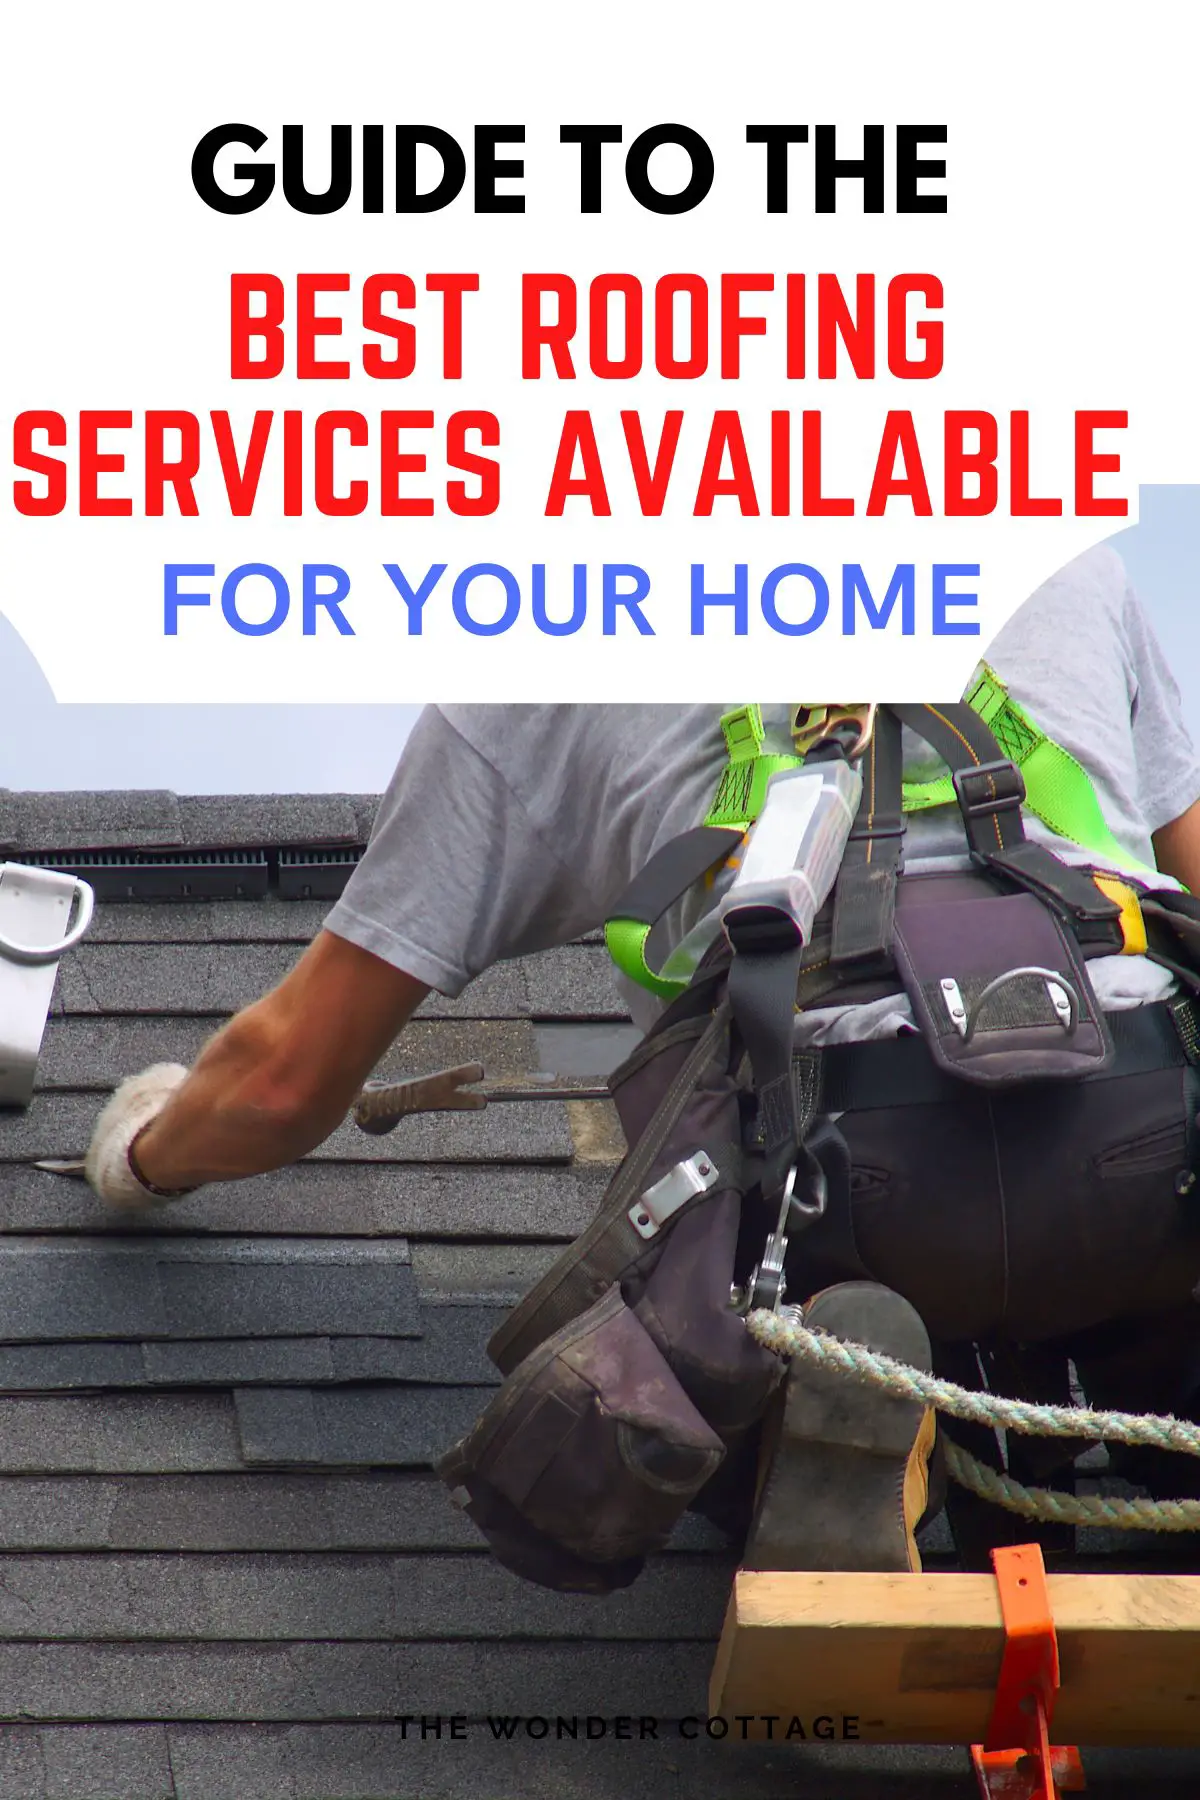 Guide To The Best Roofing Services Available For Your Home!